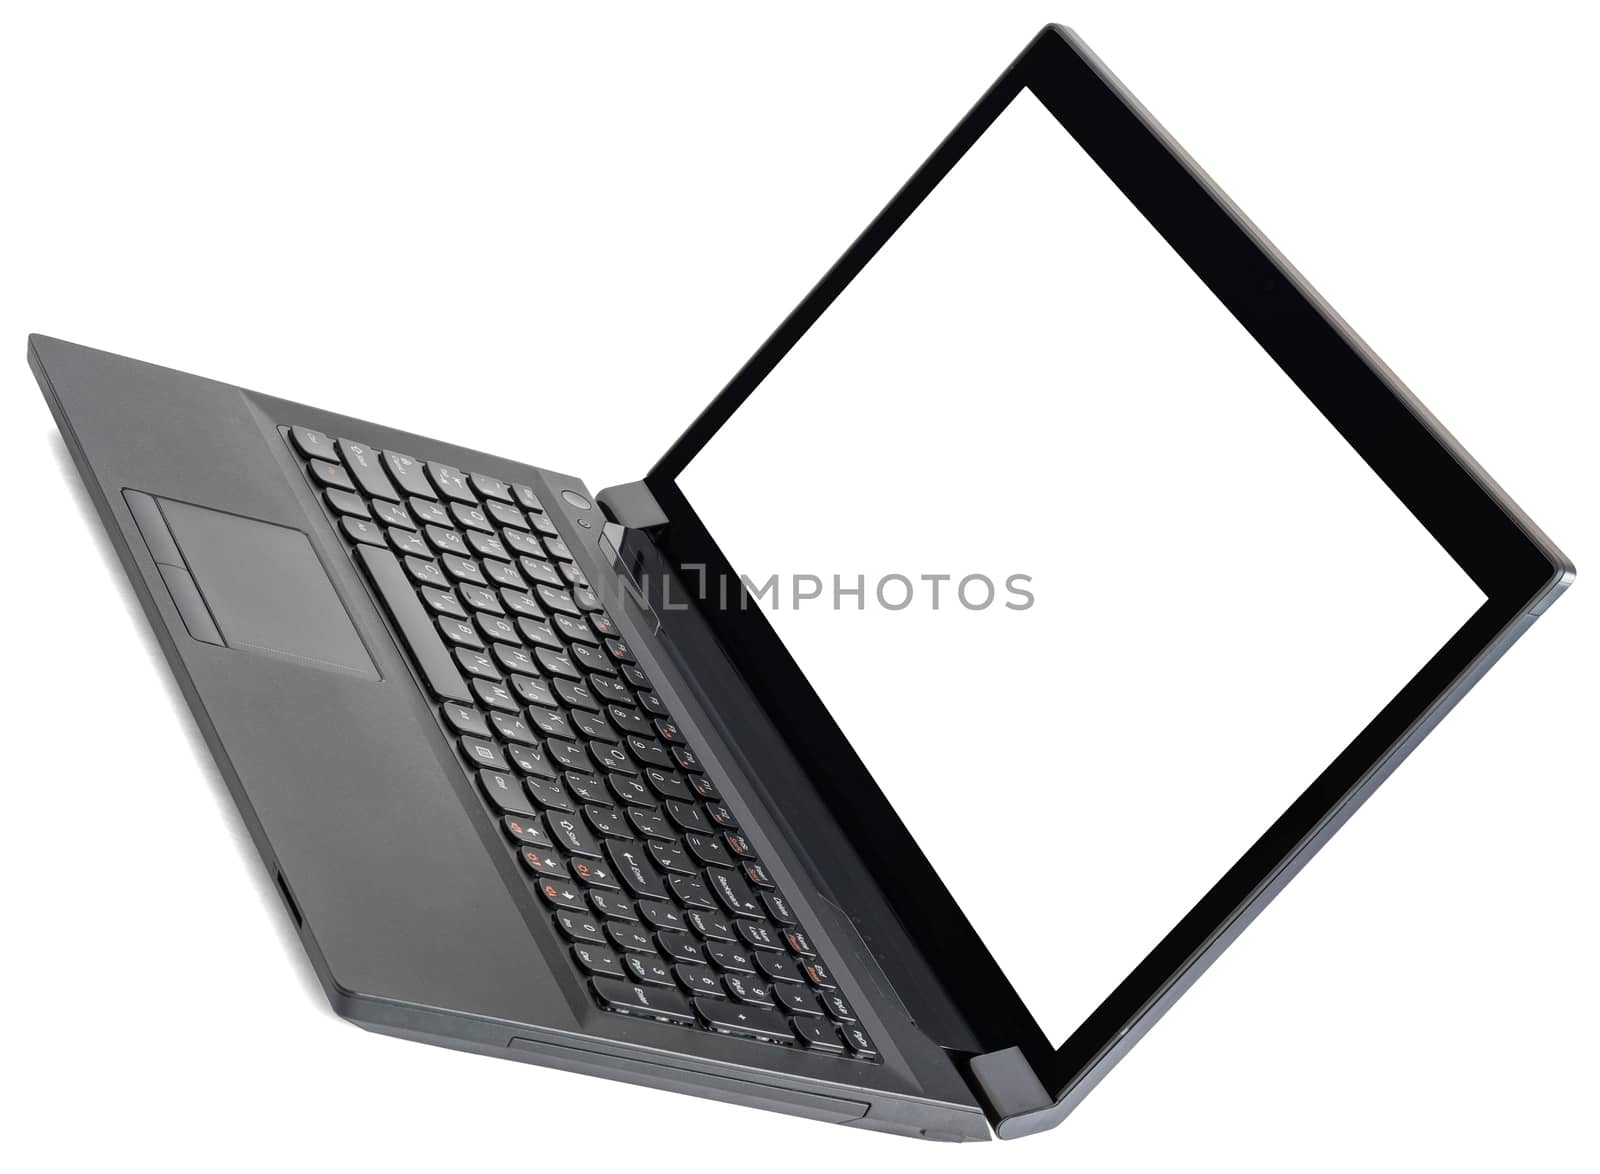 Black laptop with blank screen isolated on white background, closeup